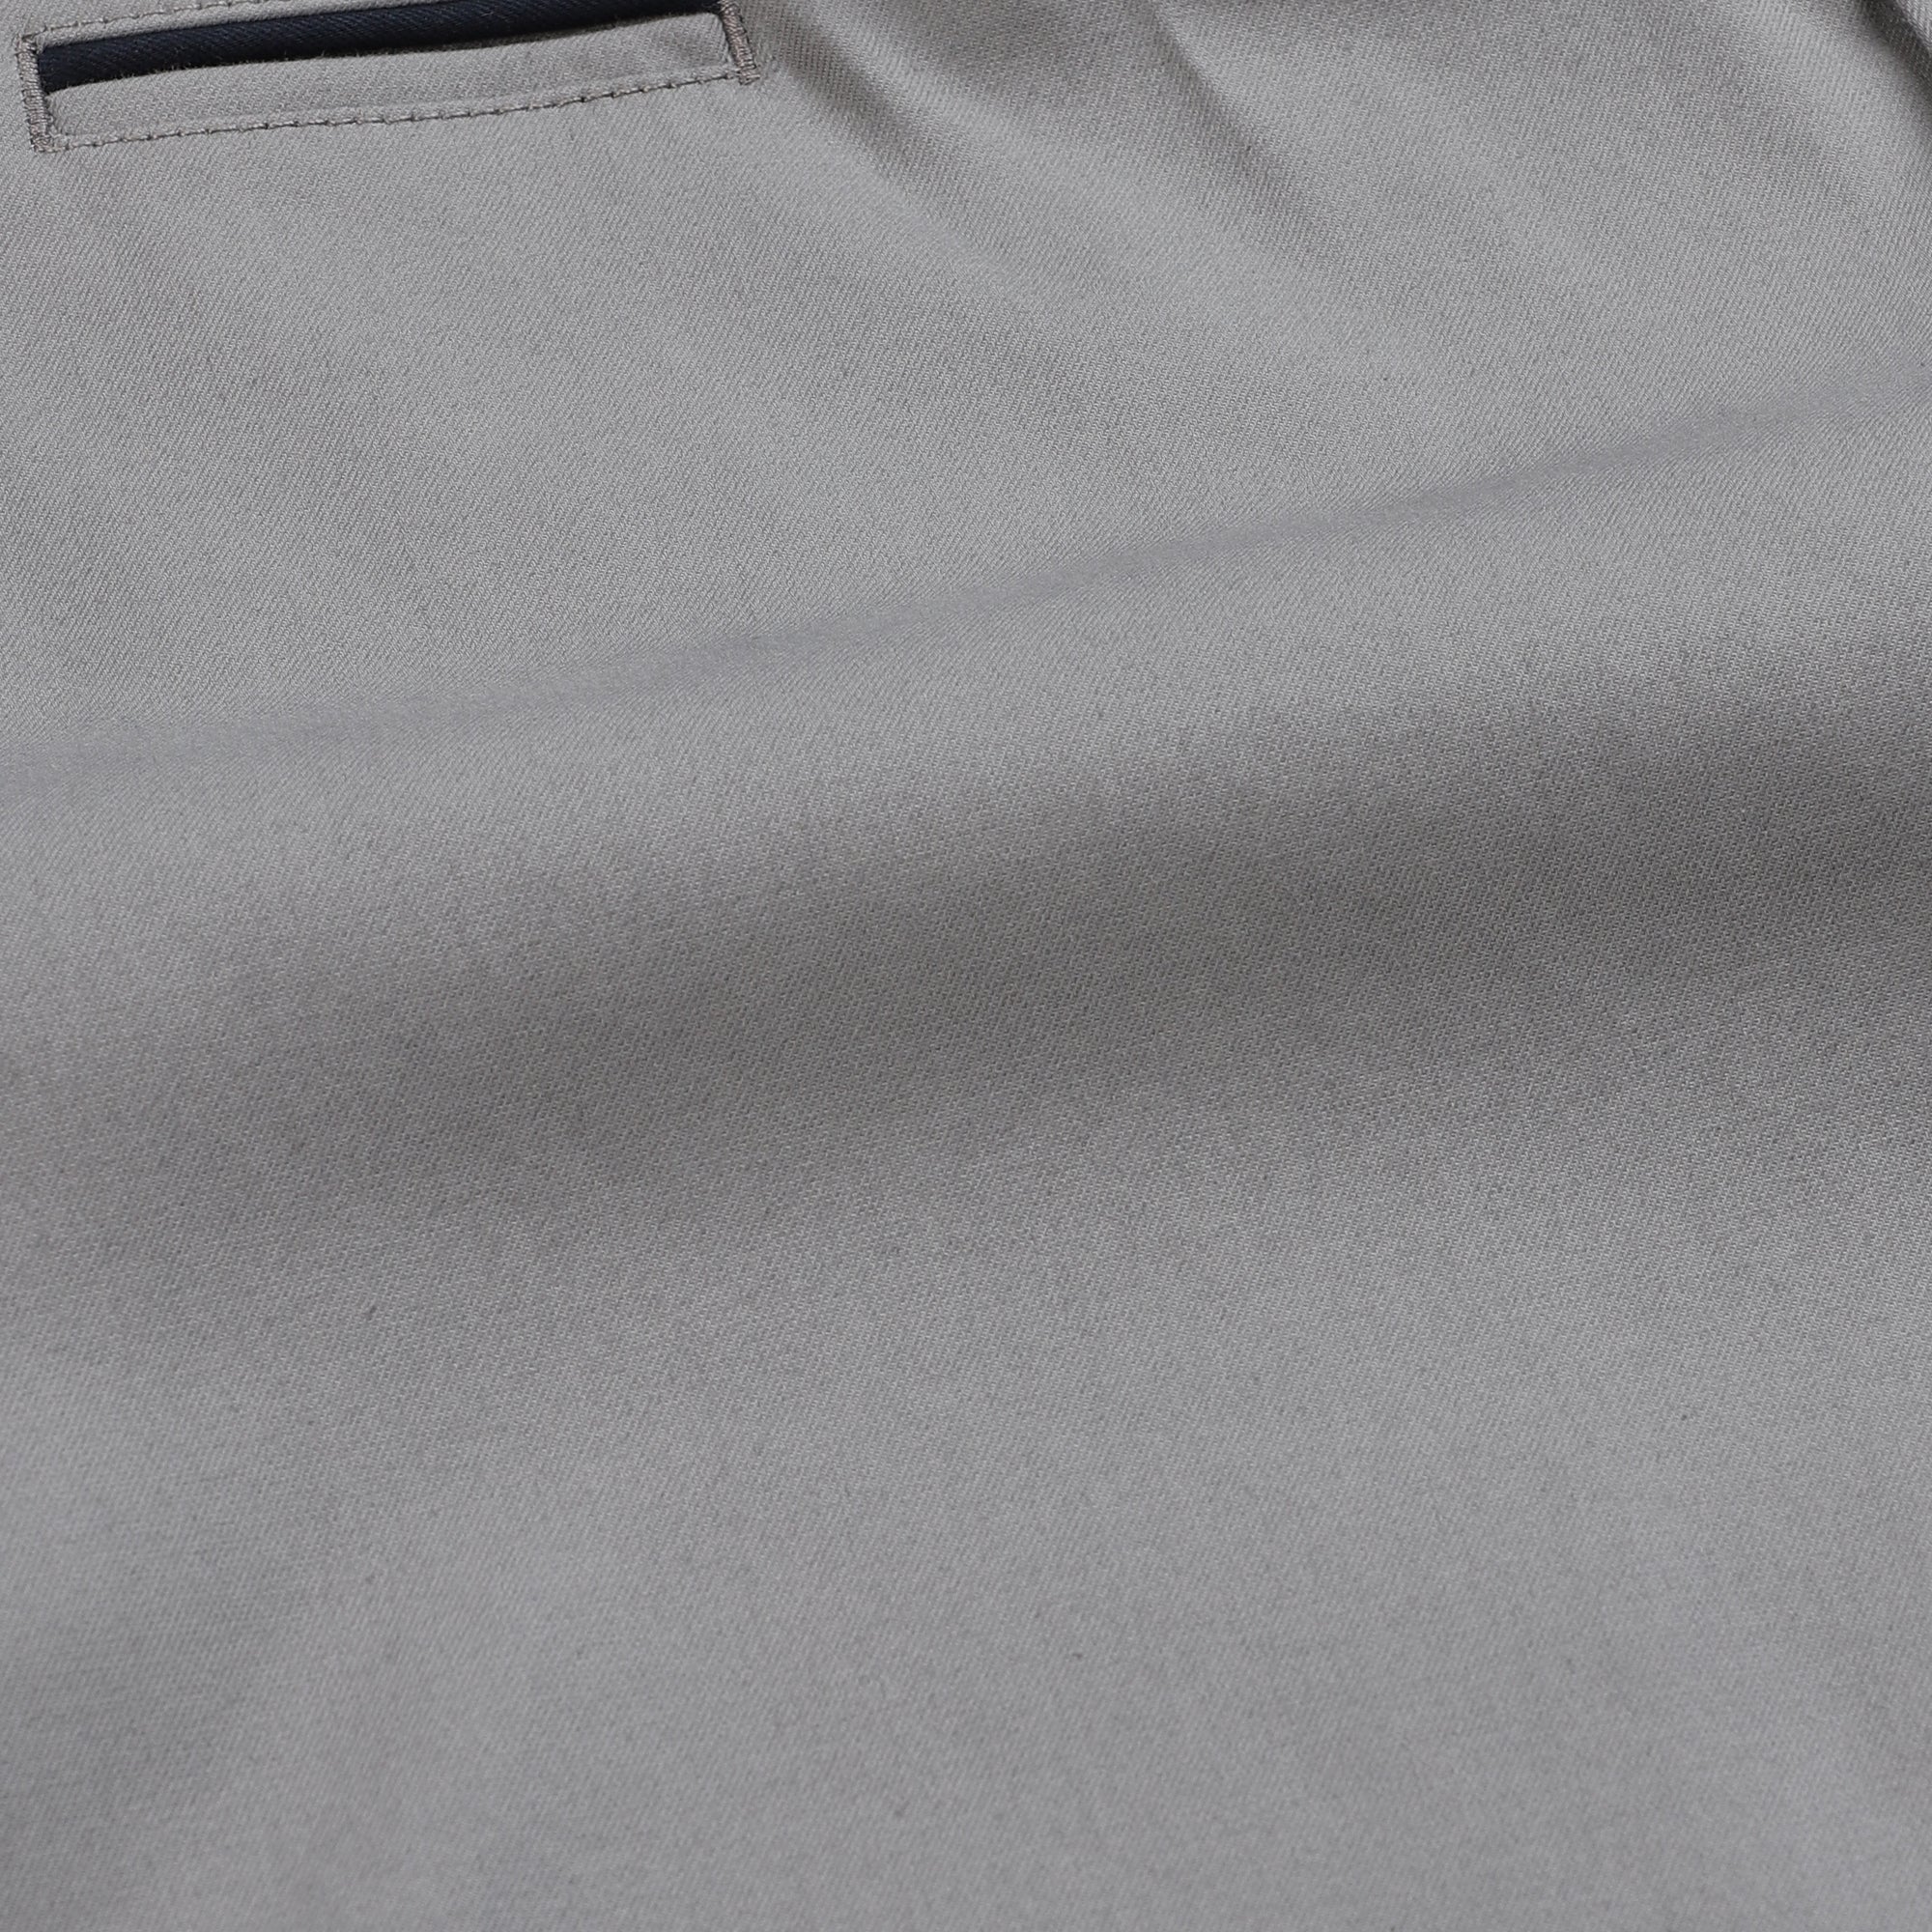 Tapered Fit Chino Shorts - Frost Grey